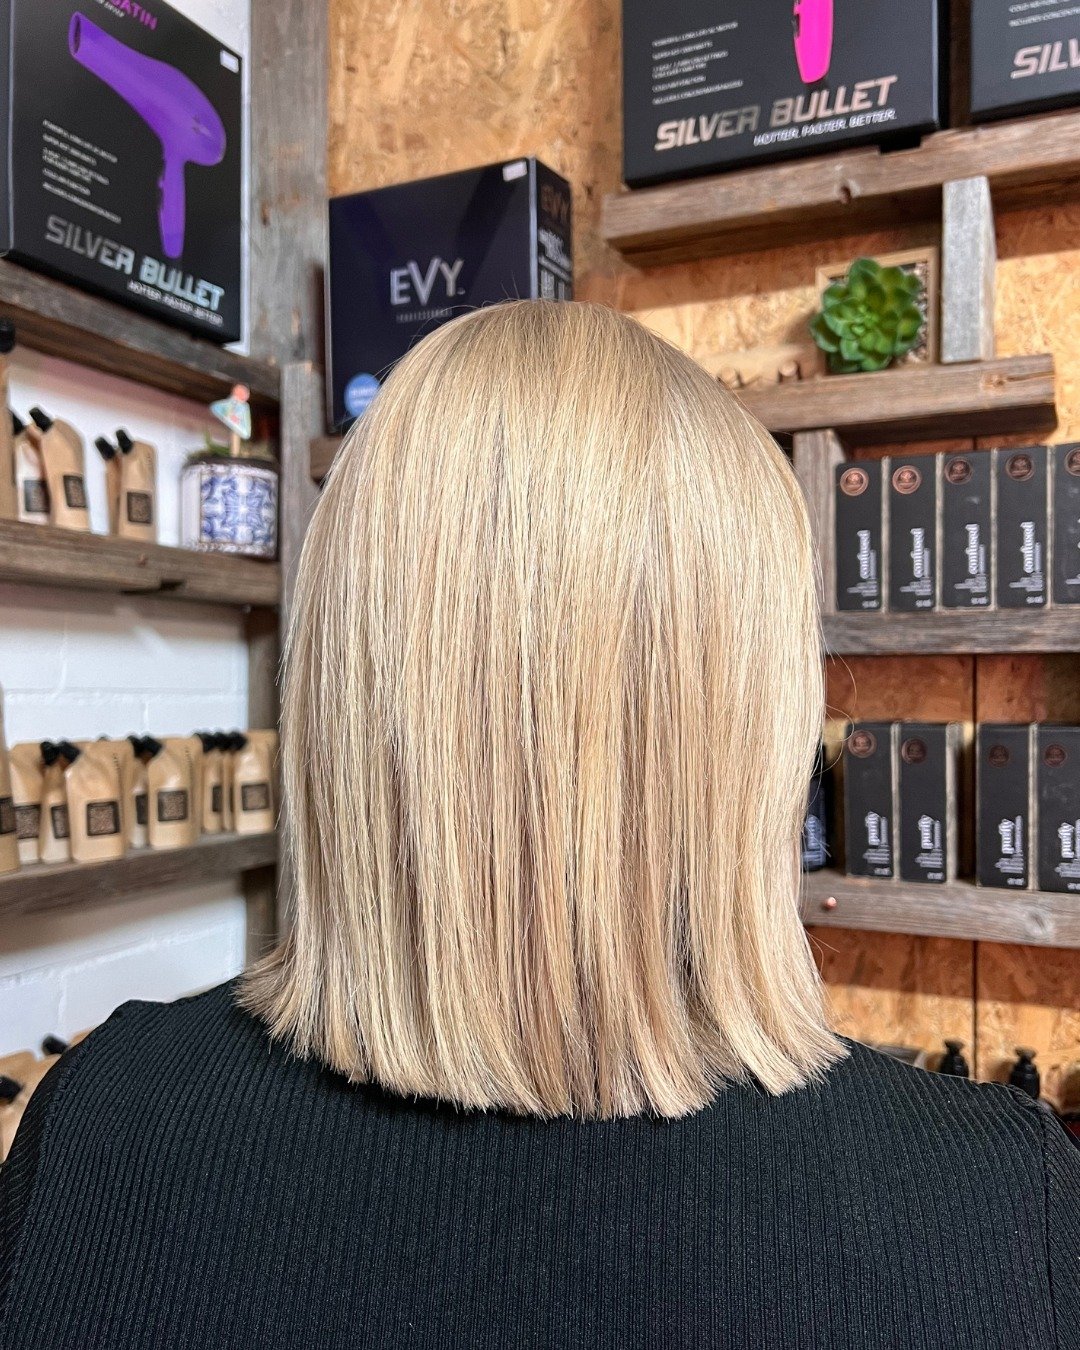 a beautiful cut and blow dry by lauren ✨️⁠
⁠
#organicministrysalon #adelaidehairsalon #adelaideorganicsalon #lowtoxsalon #adelaidehairdresser #organicbeauty #naturalhaircare #holistichaircare #organicsalon #hairgoals⁠
⁠